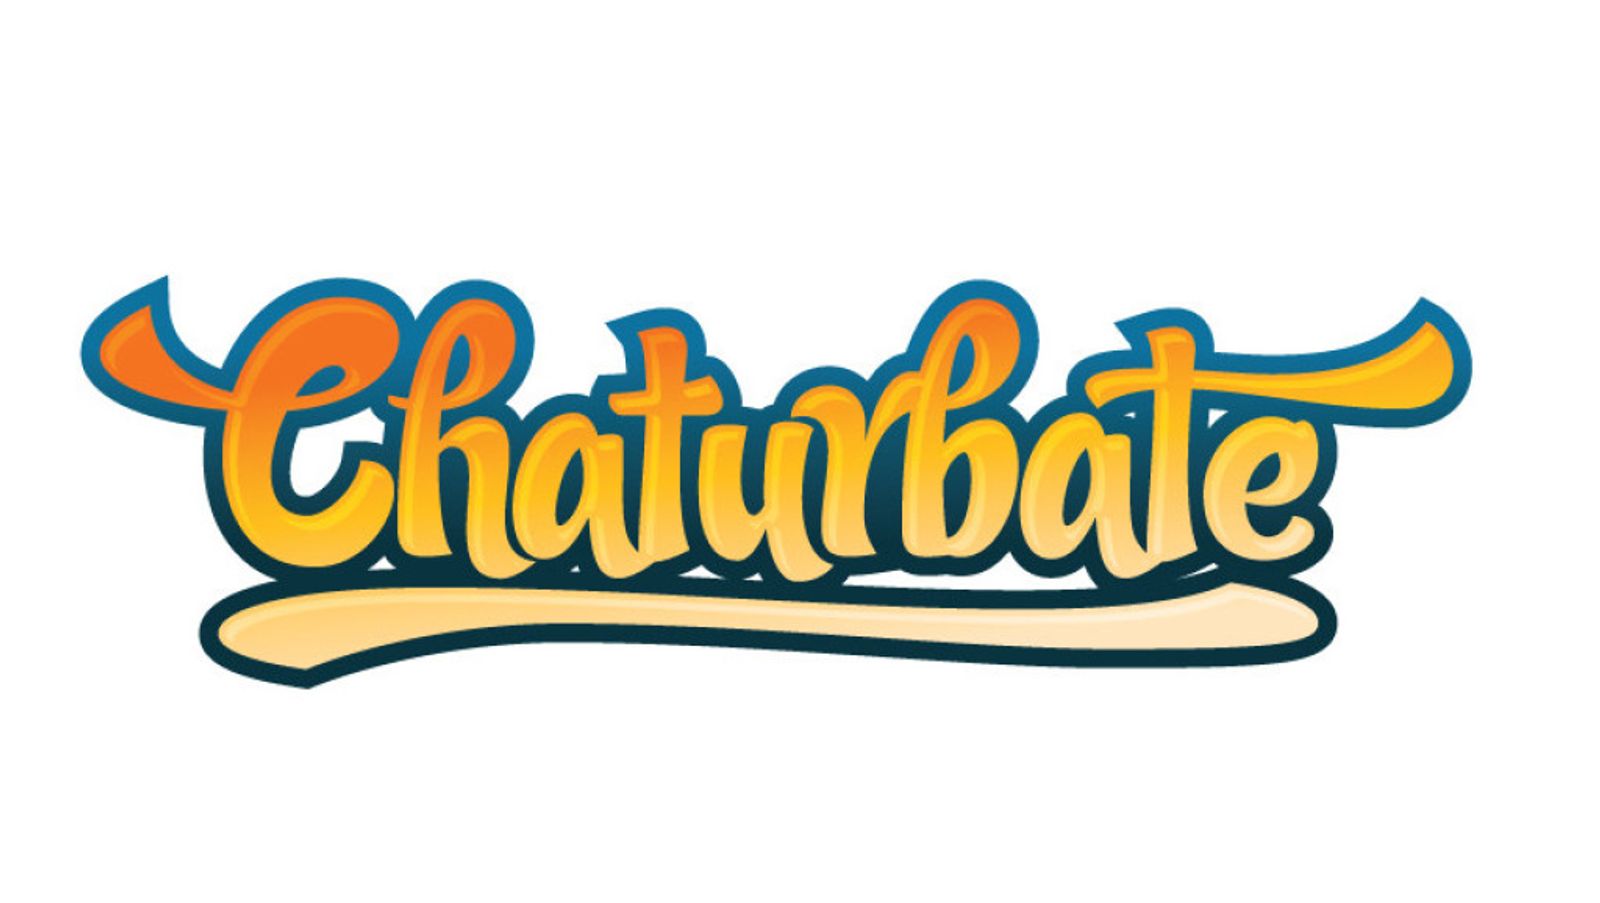 Chaturbate Launches Online Retail Store | AVN